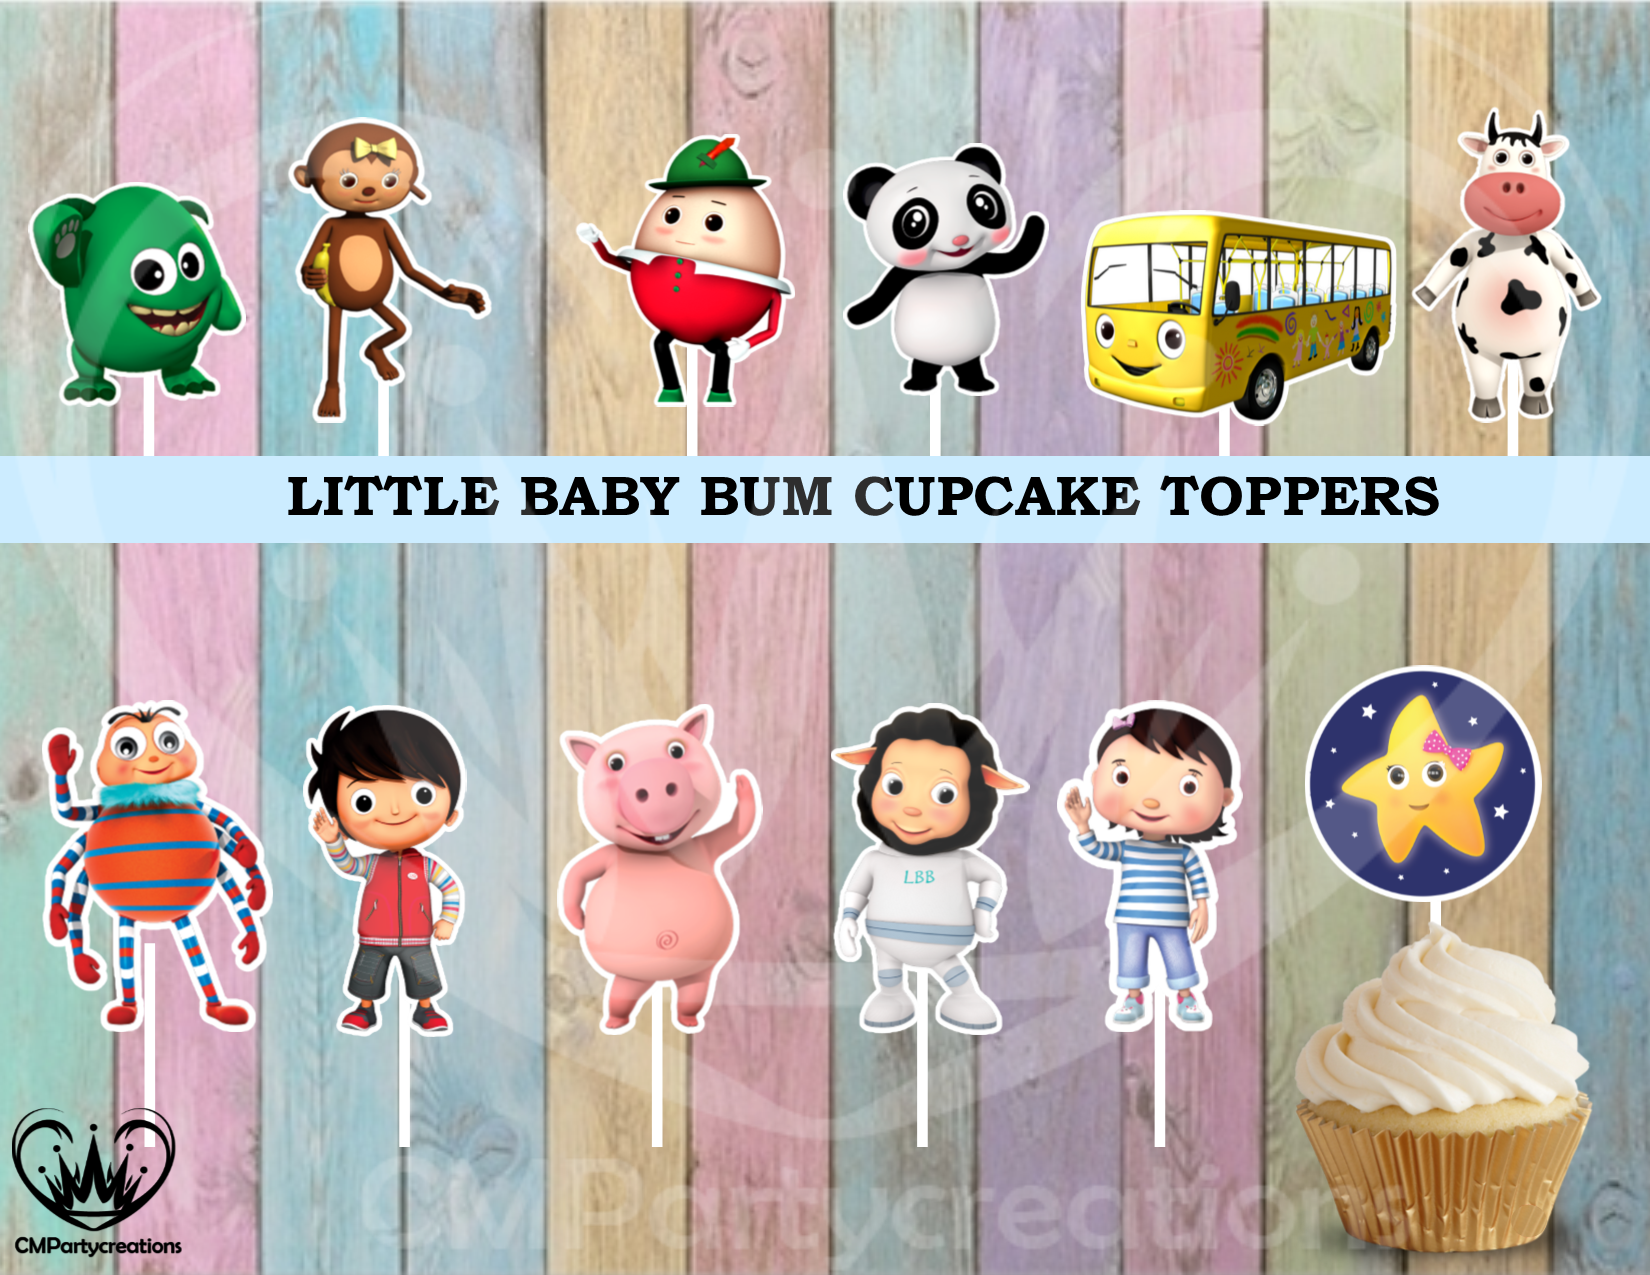 Download Paper Party Supplies Centerpieces Little Baby Bum Cupcake Toppers